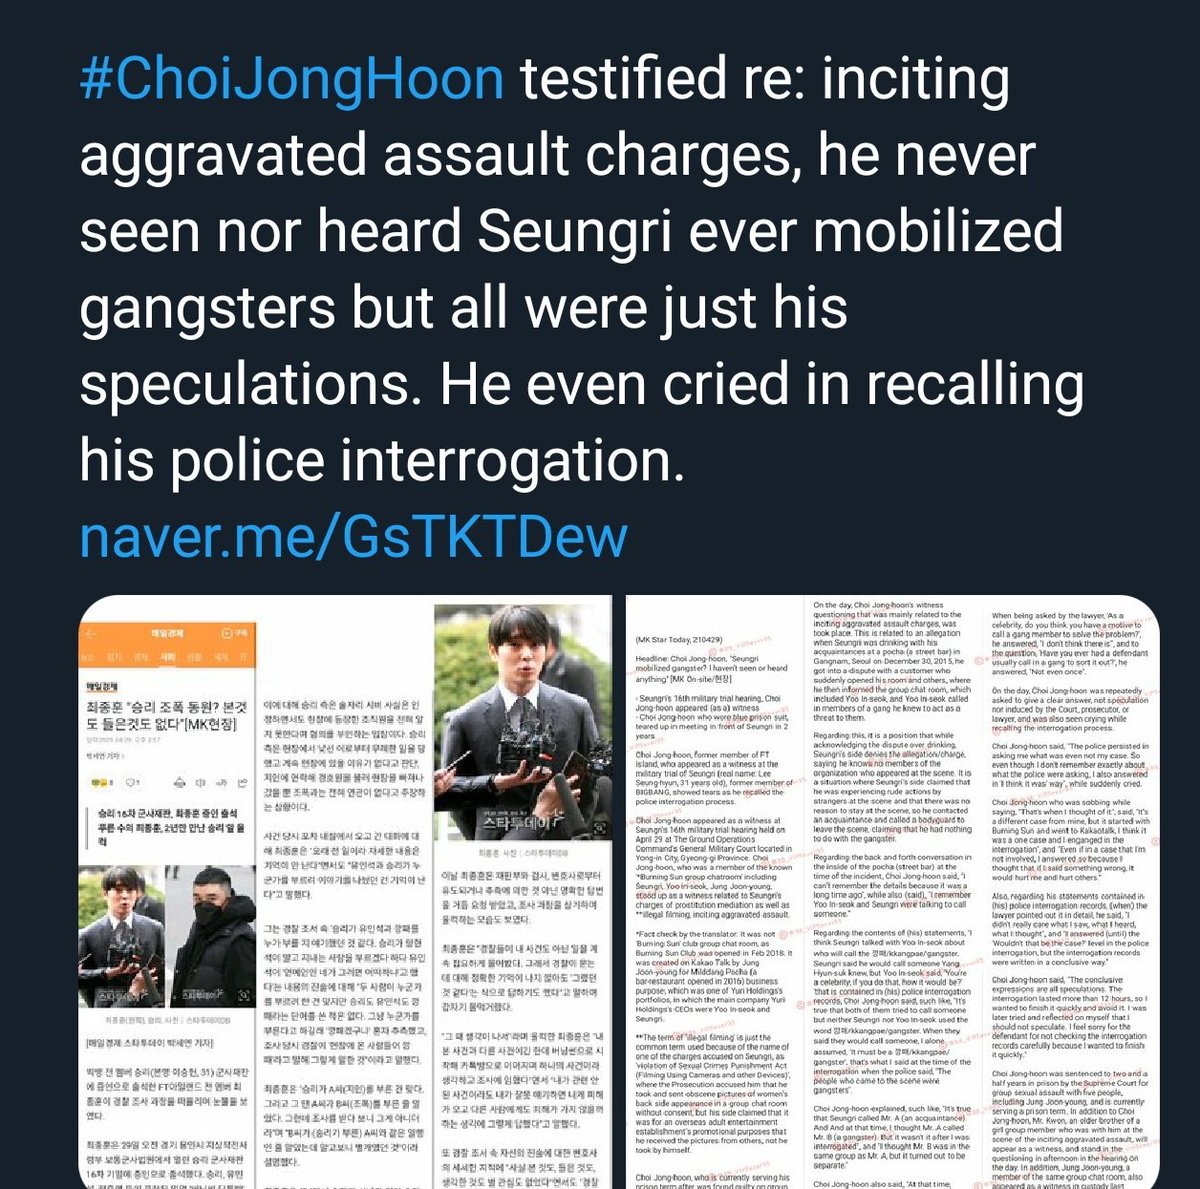 Seungri's 16th hearing. Choi jonghoon, a witness of accusation of inciting aggravated assault charges testified saying that all were just his speculation. More information https://twitter.com/poutyvip5lines/status/1387796938888777731?s=19